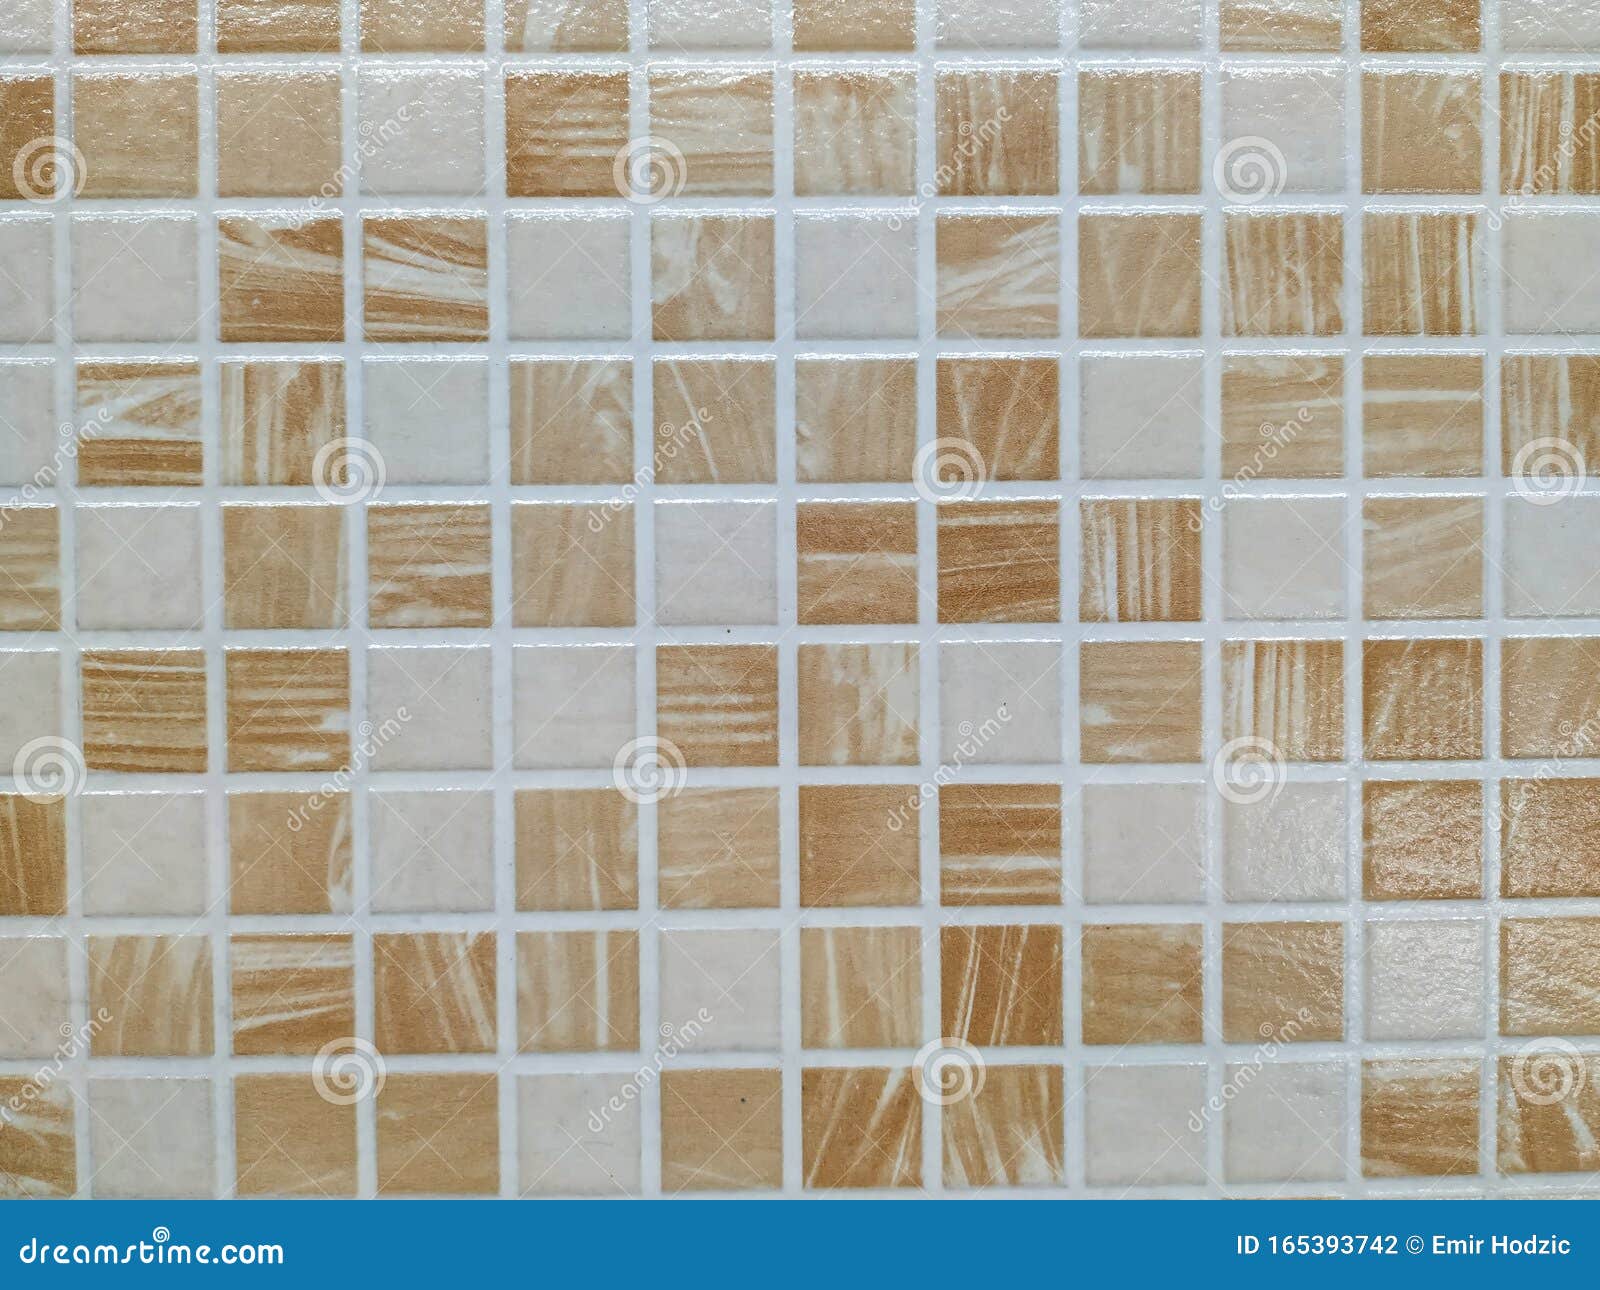 Small Tiles Of Orange And White Color For Bathroom Or Kitchen